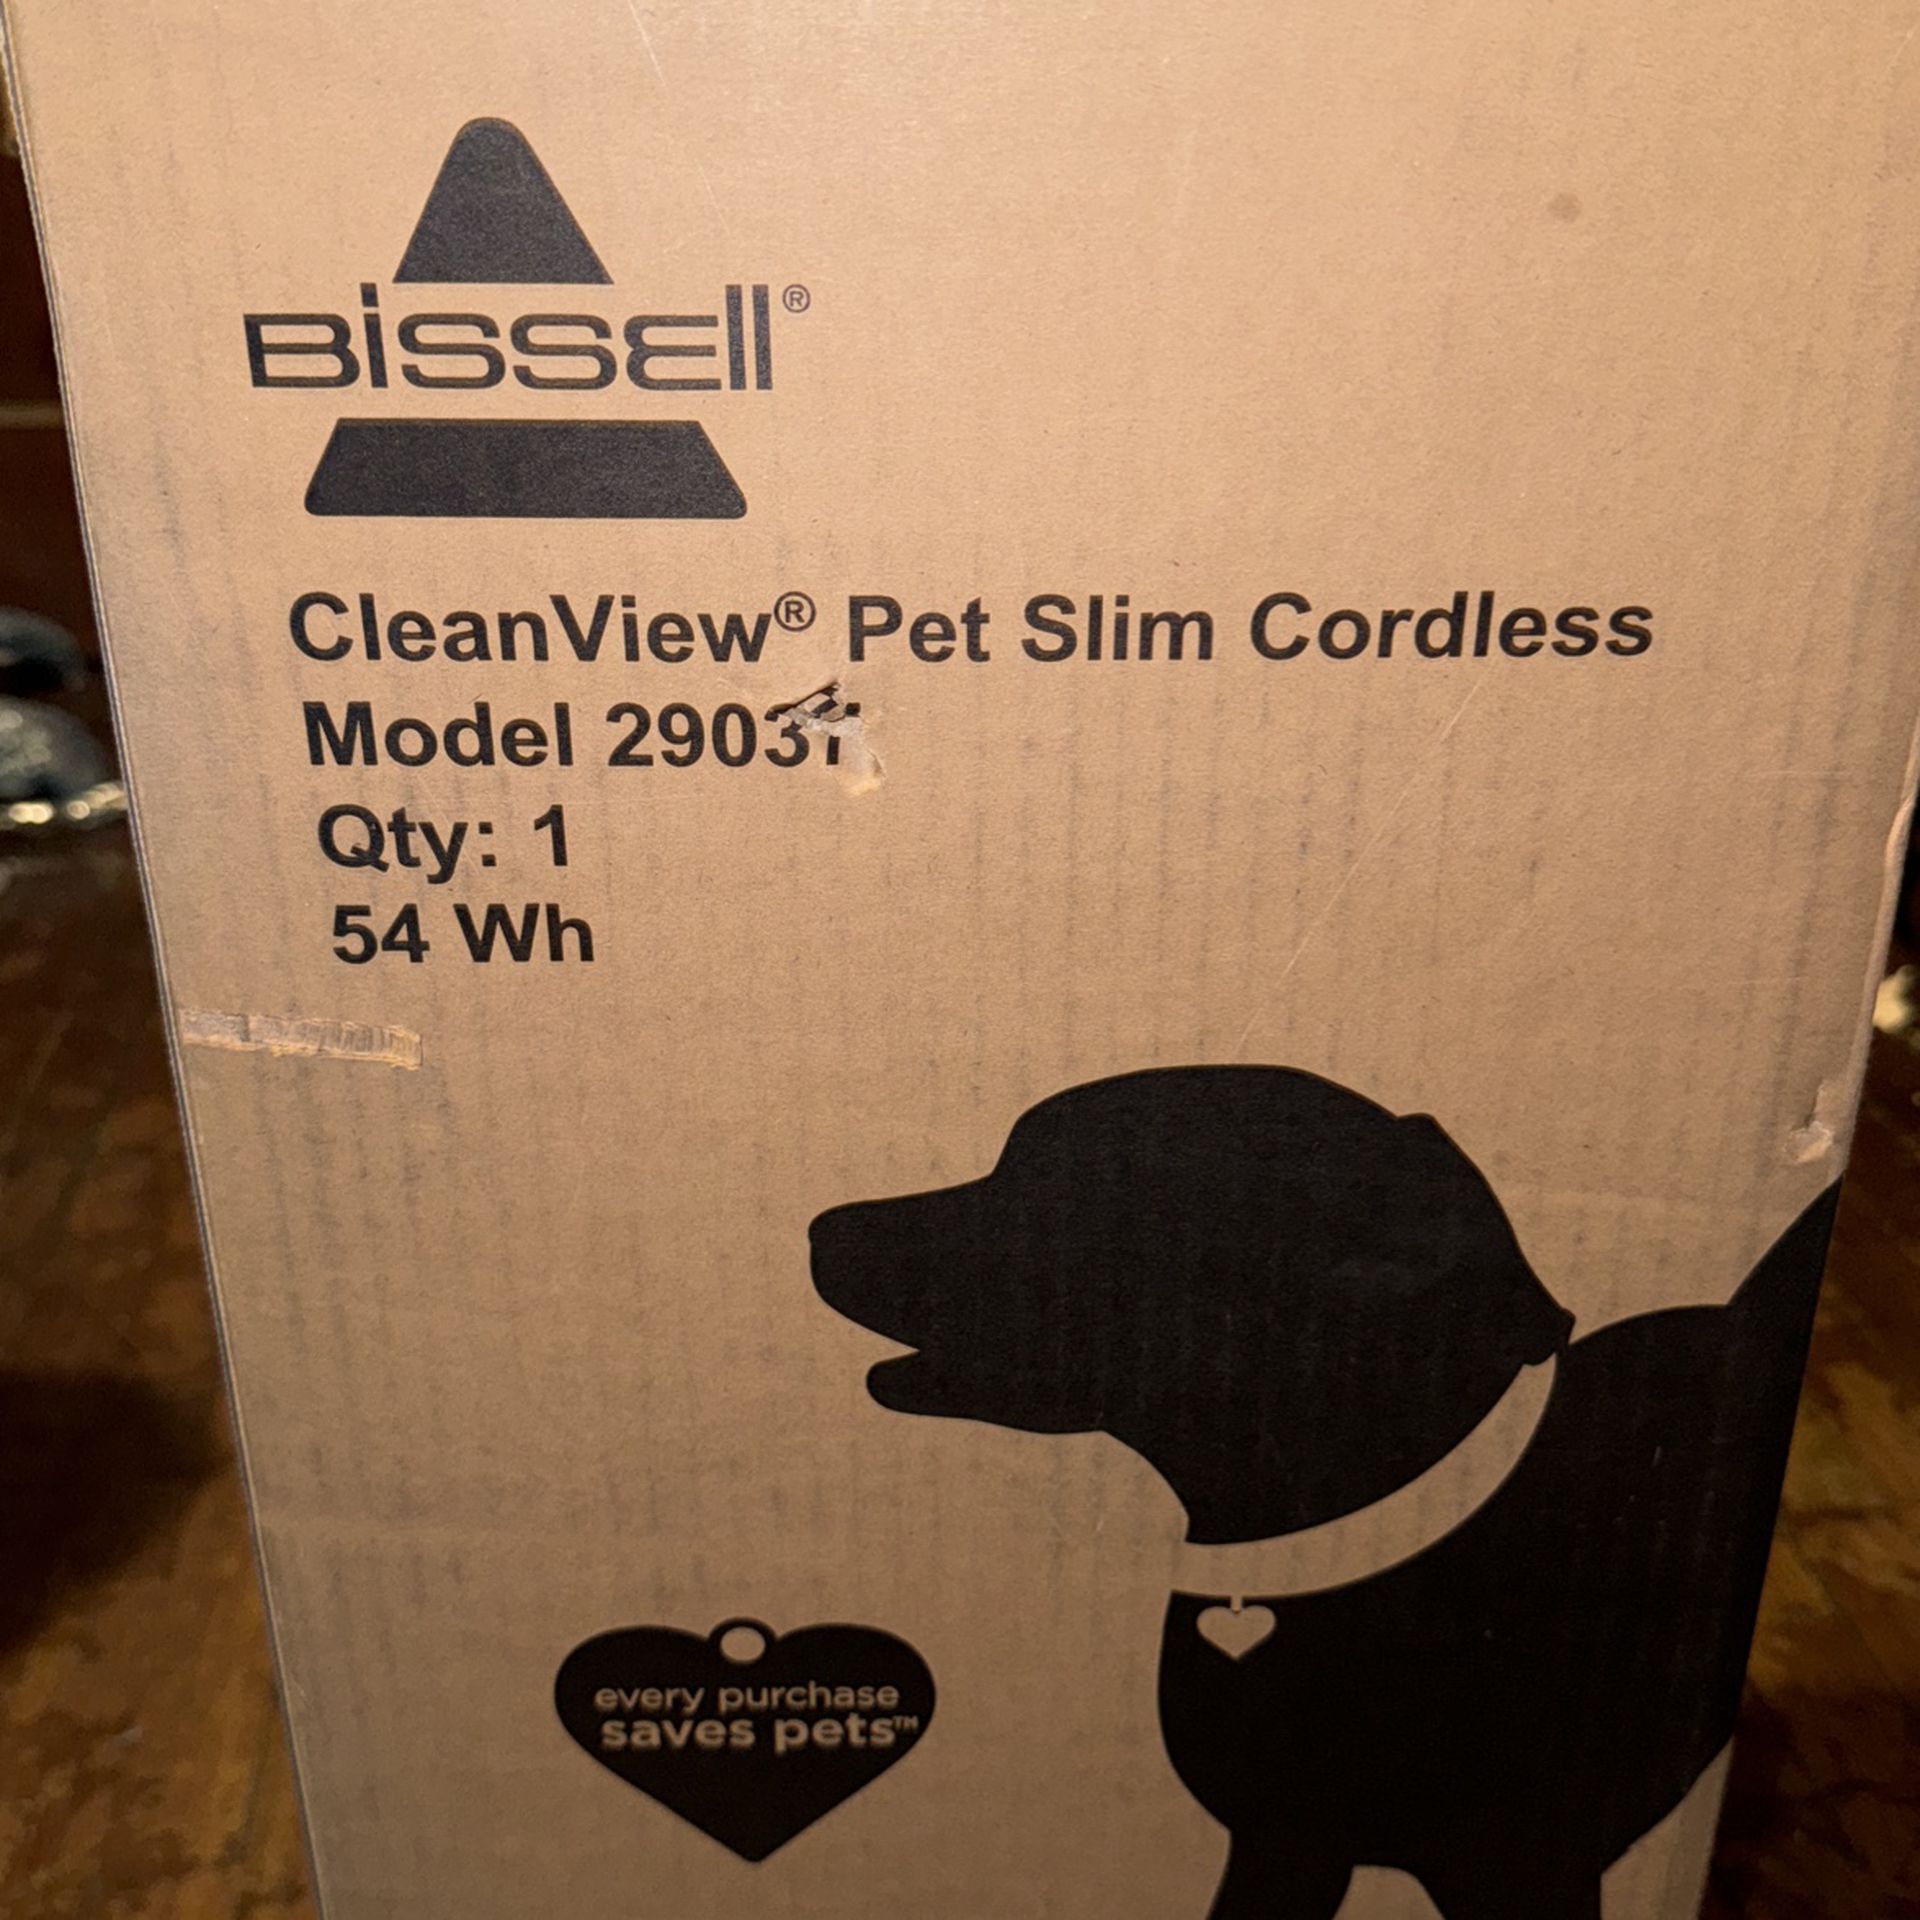 Bissell CleanView Pet Slim Cordless